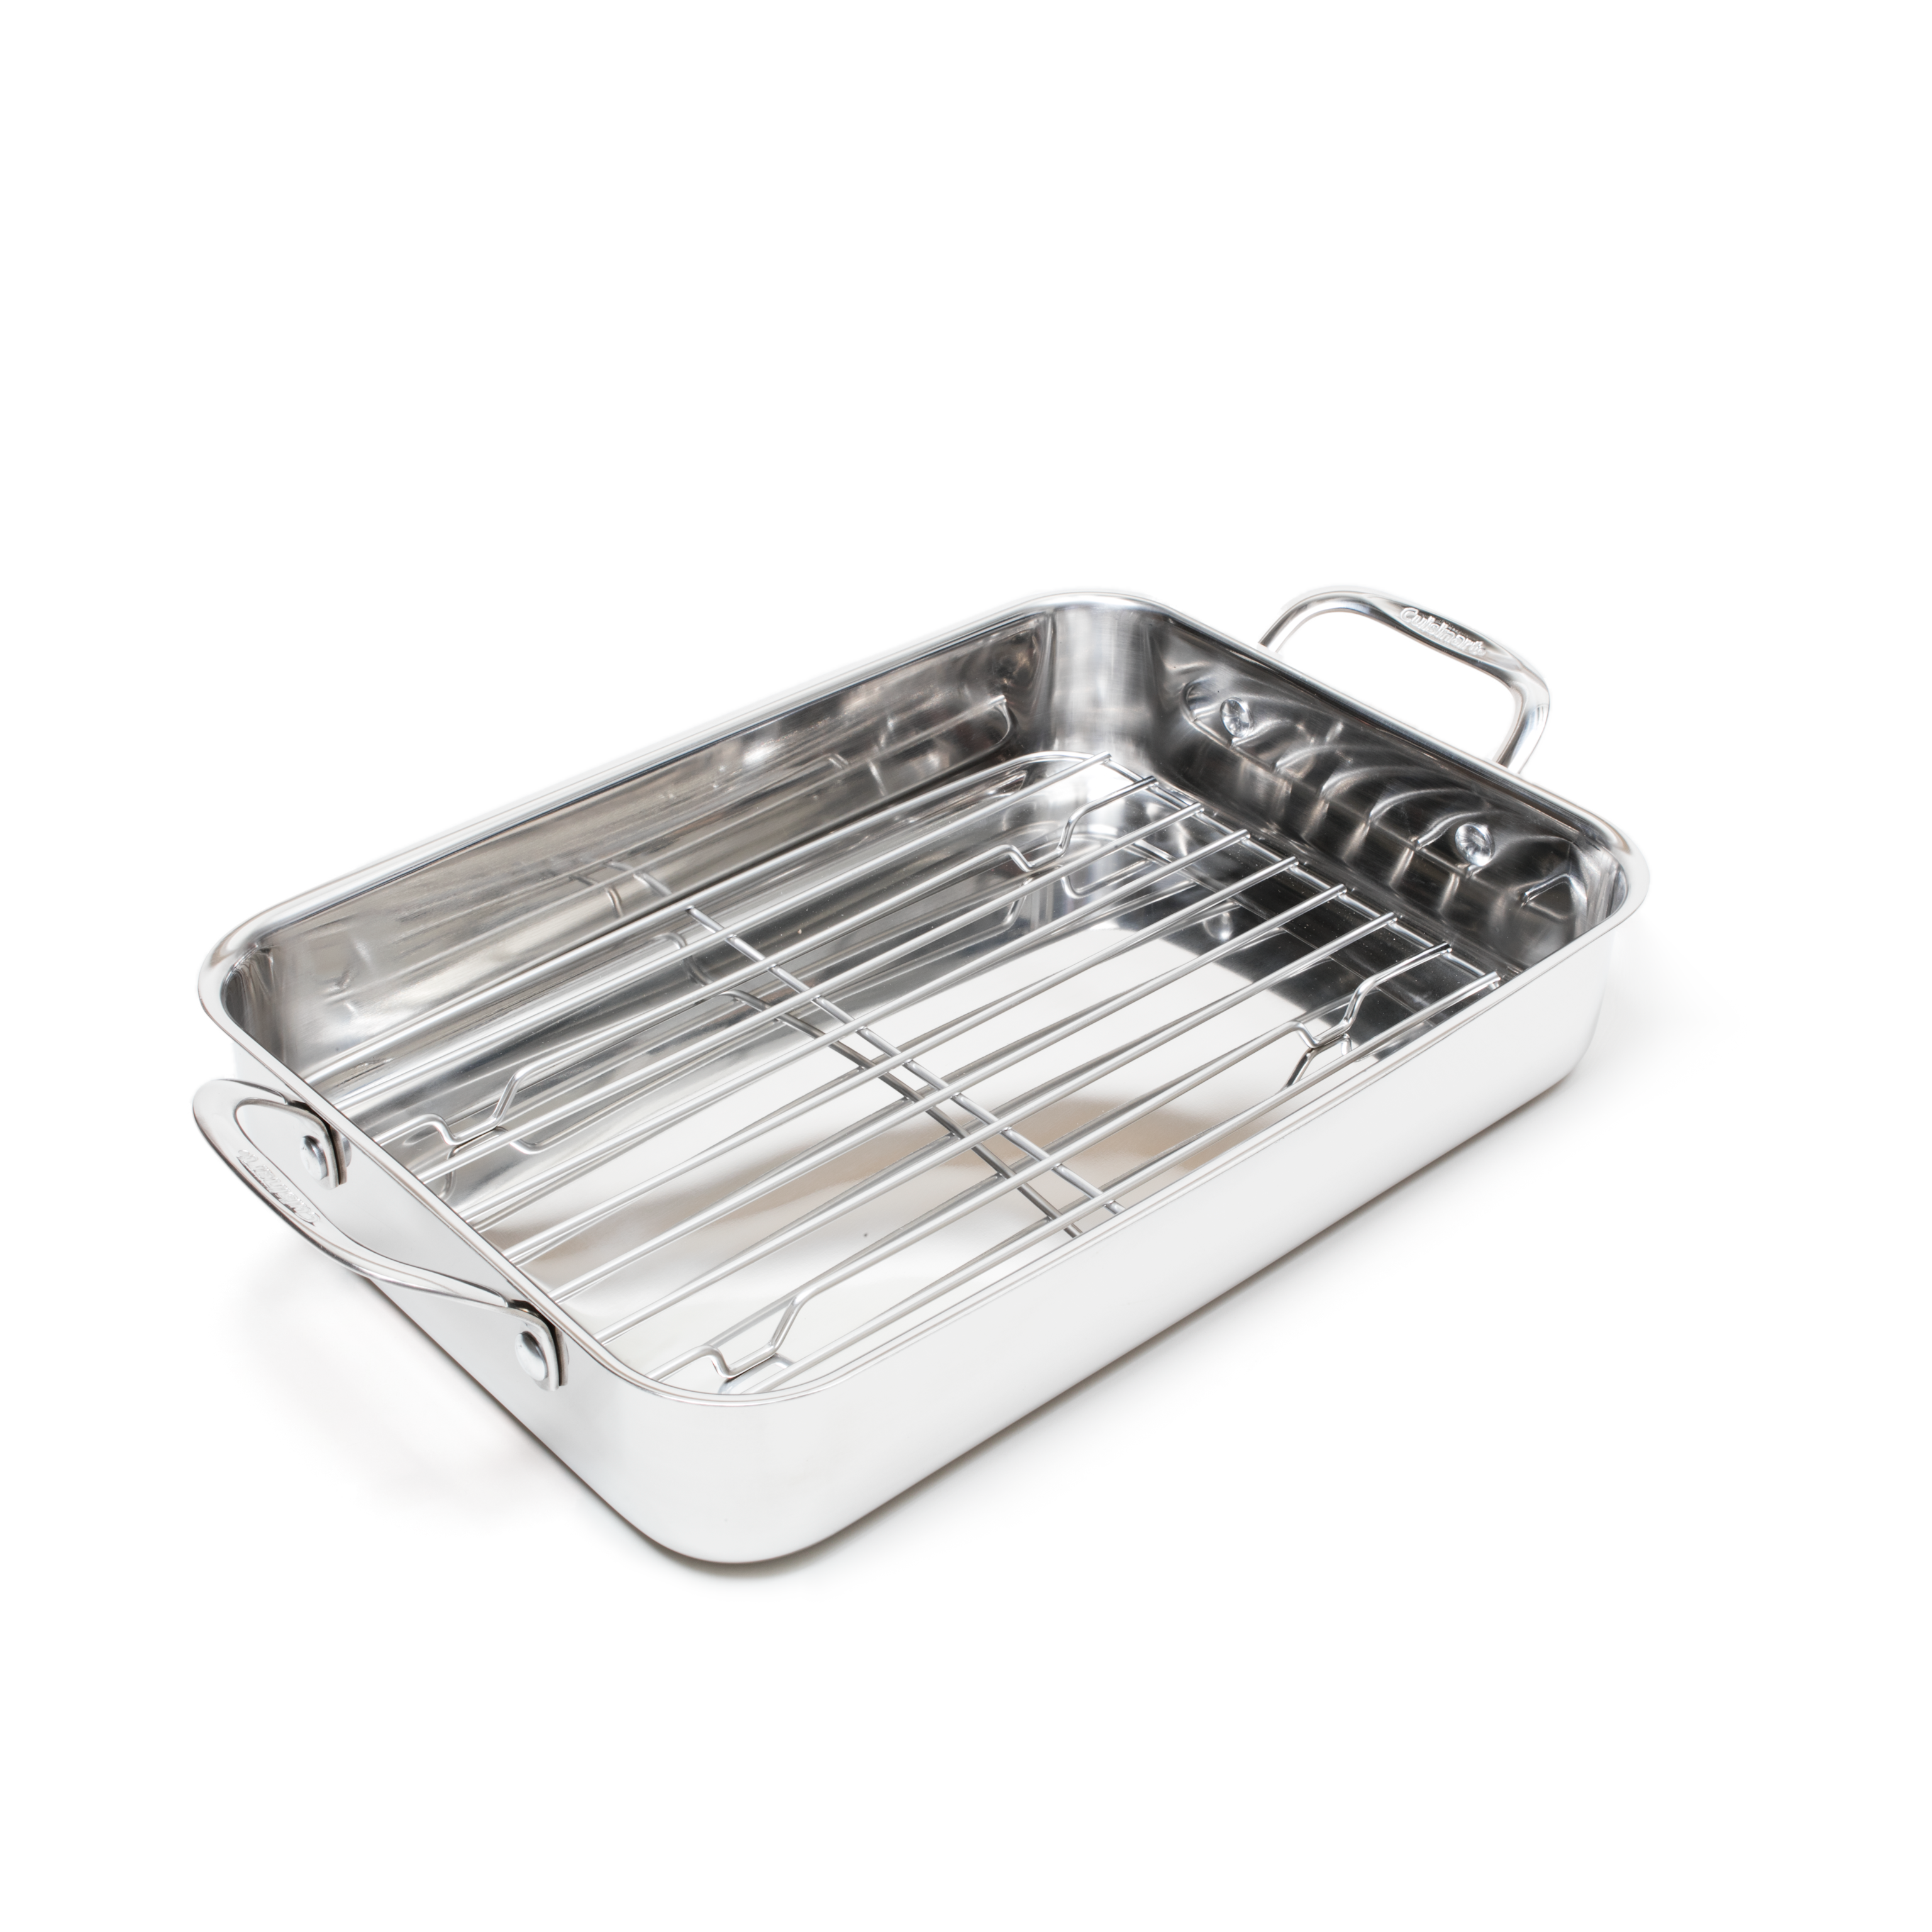 https://res.cloudinary.com/hksqkdlah/image/upload/37827_sil-smallroastingpans-cuisinart-14in-chefs-classic-stainless-steel-lasagna-pan-7117-14rr.png